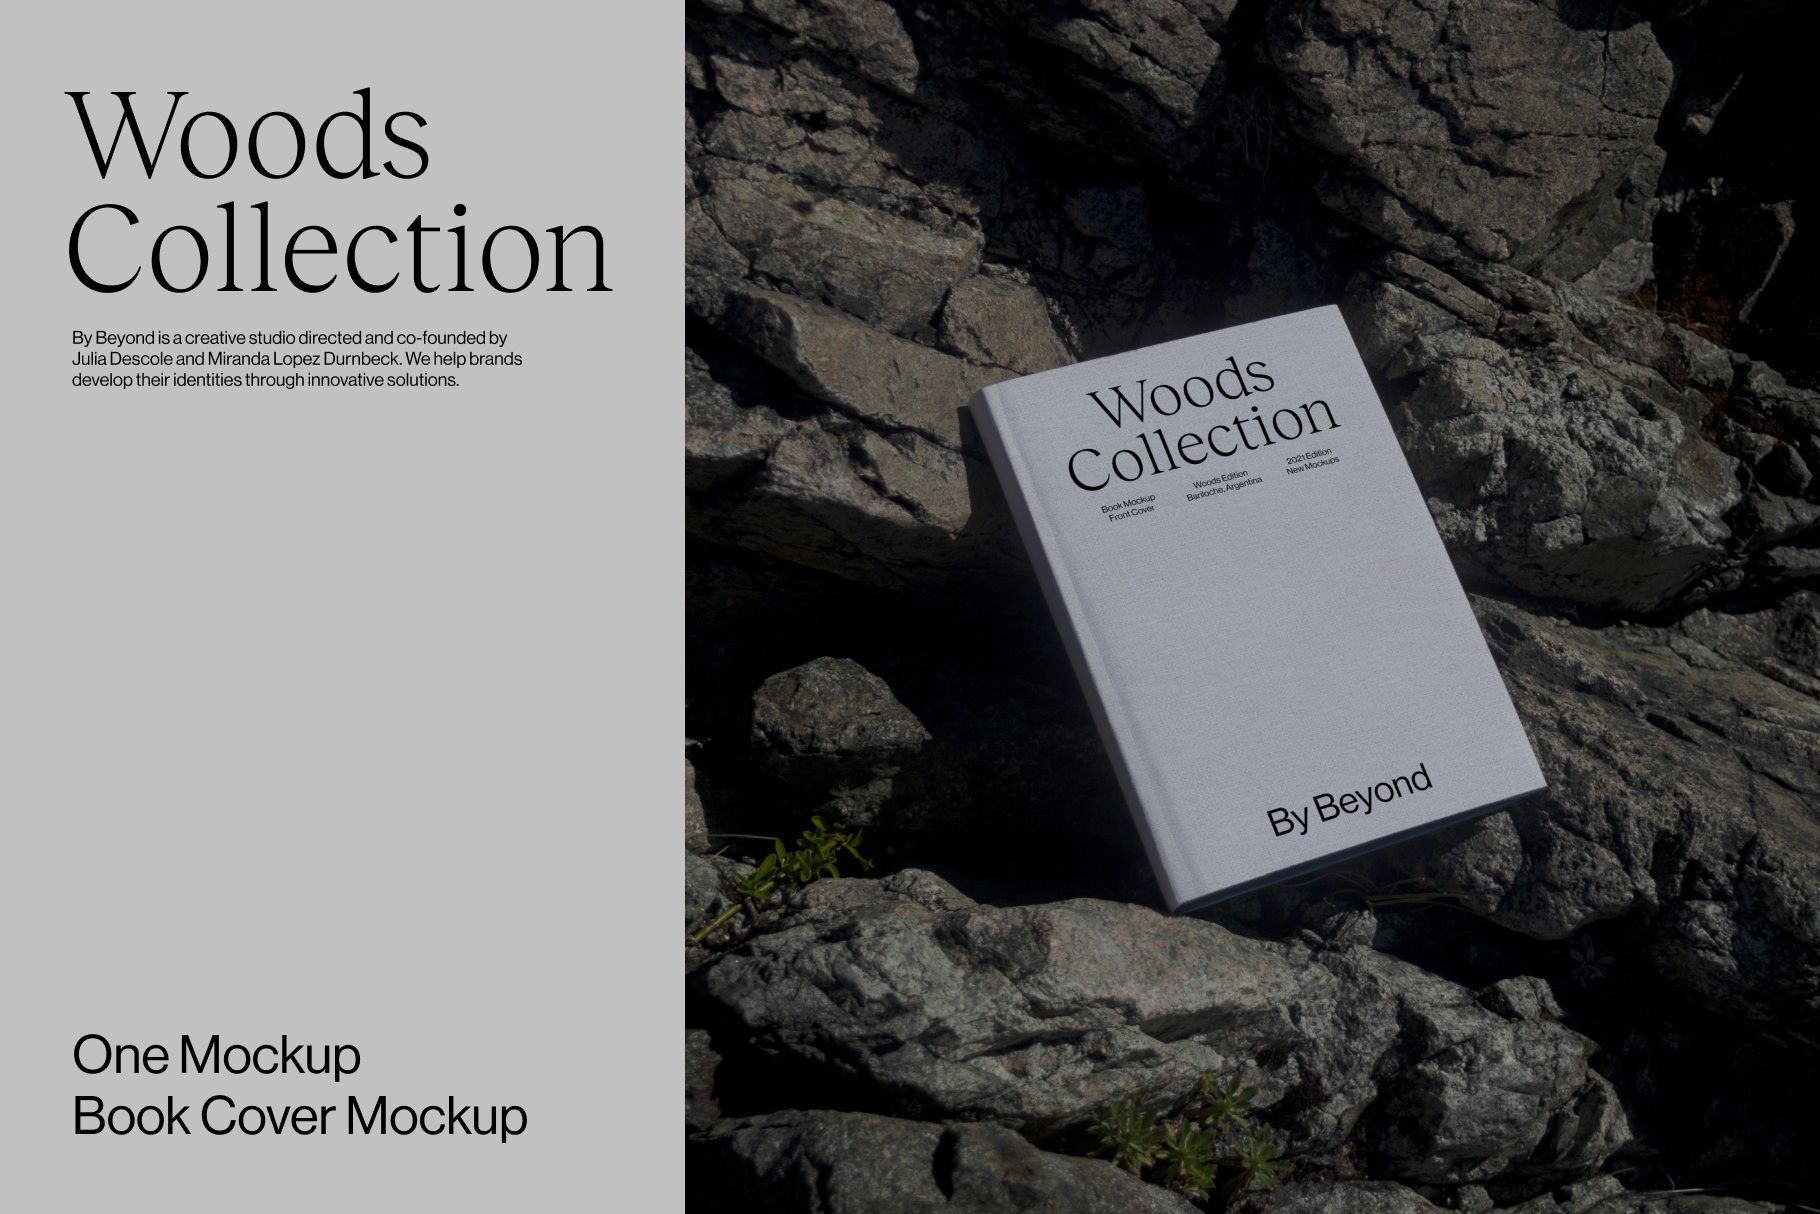 Woods Collection Book Cover Mockup 2 cover image.